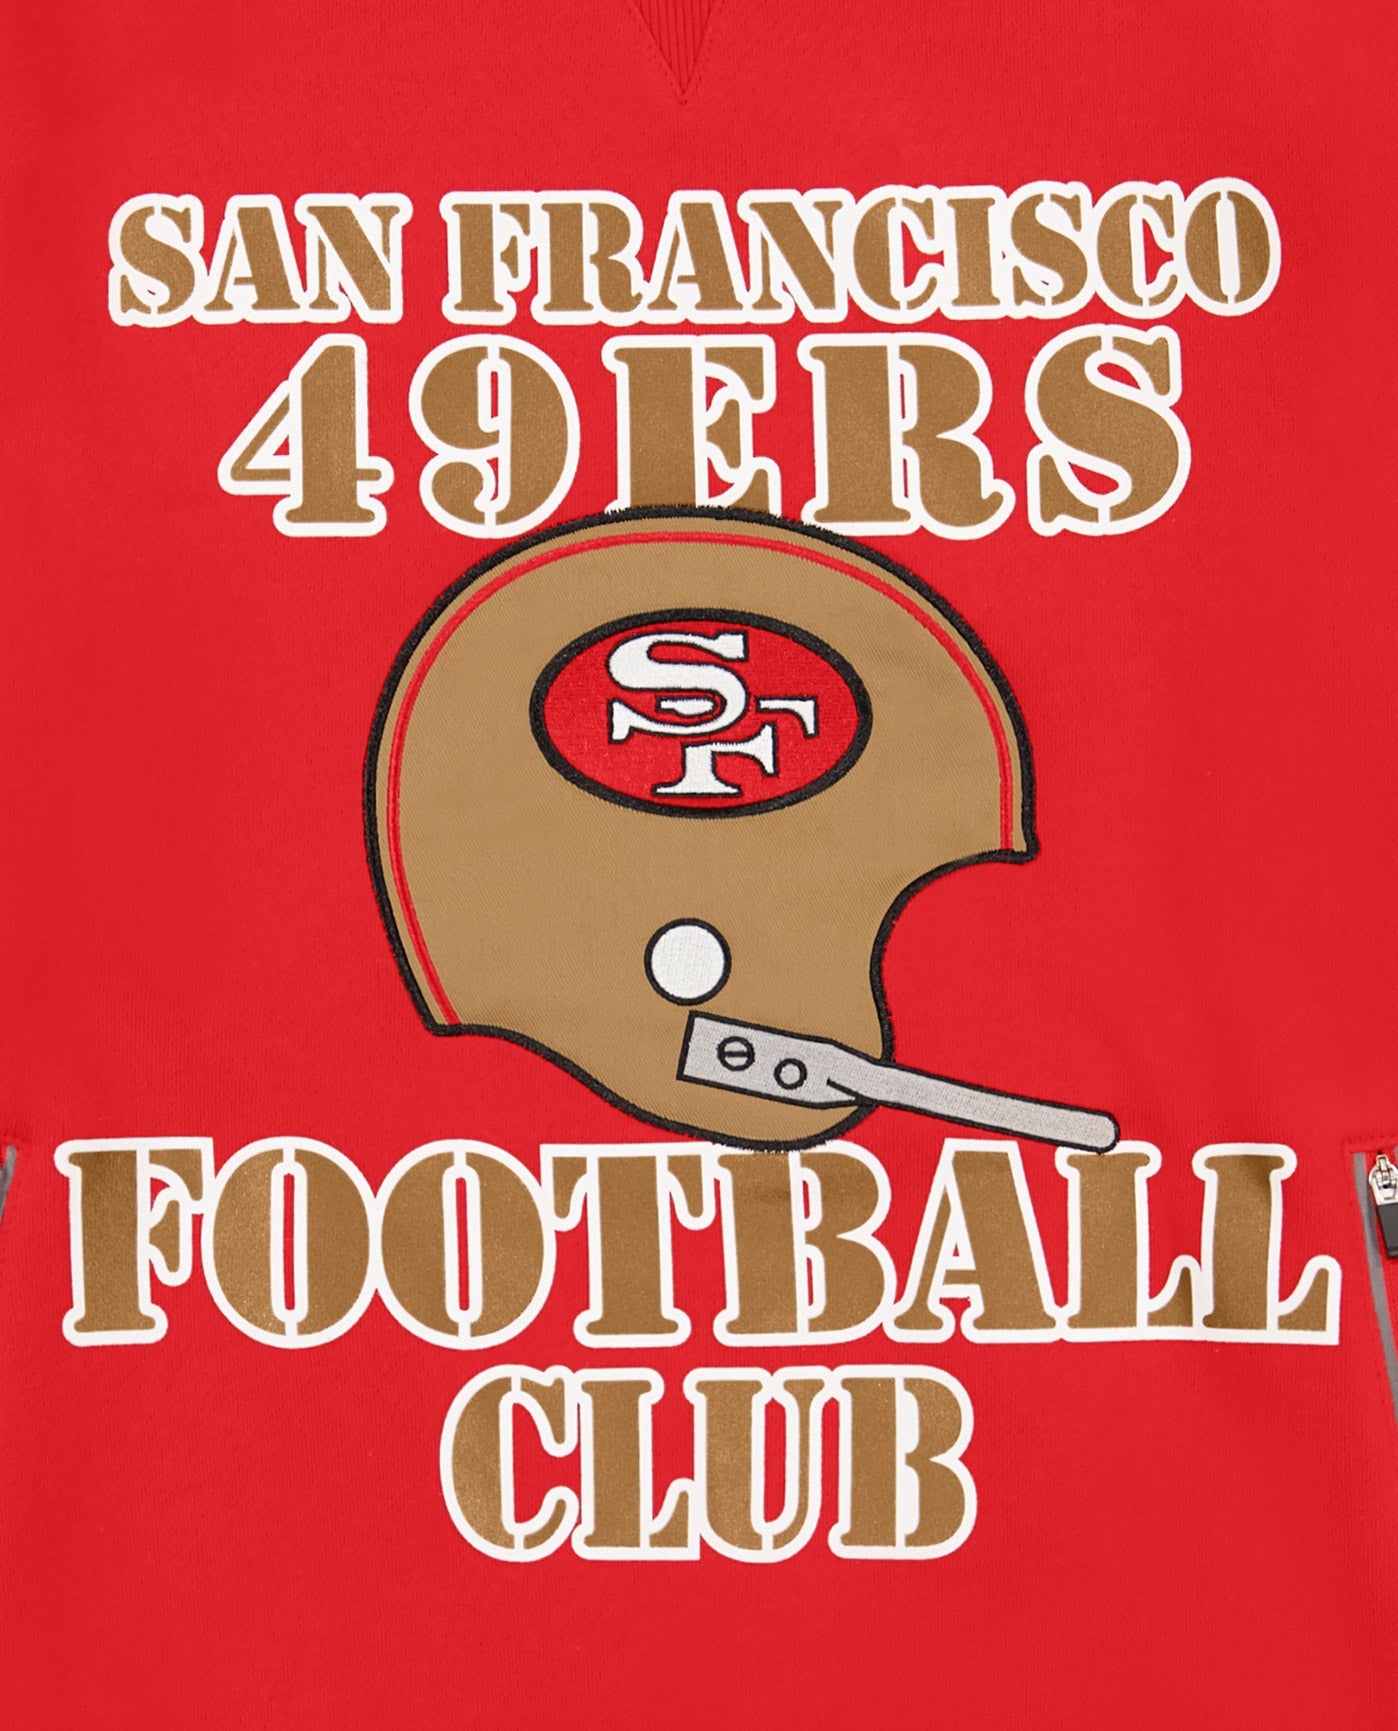 SAN FRANCISCO 49ERS FOOTBALL CLUB writing and helmet logo front | 49ers Red